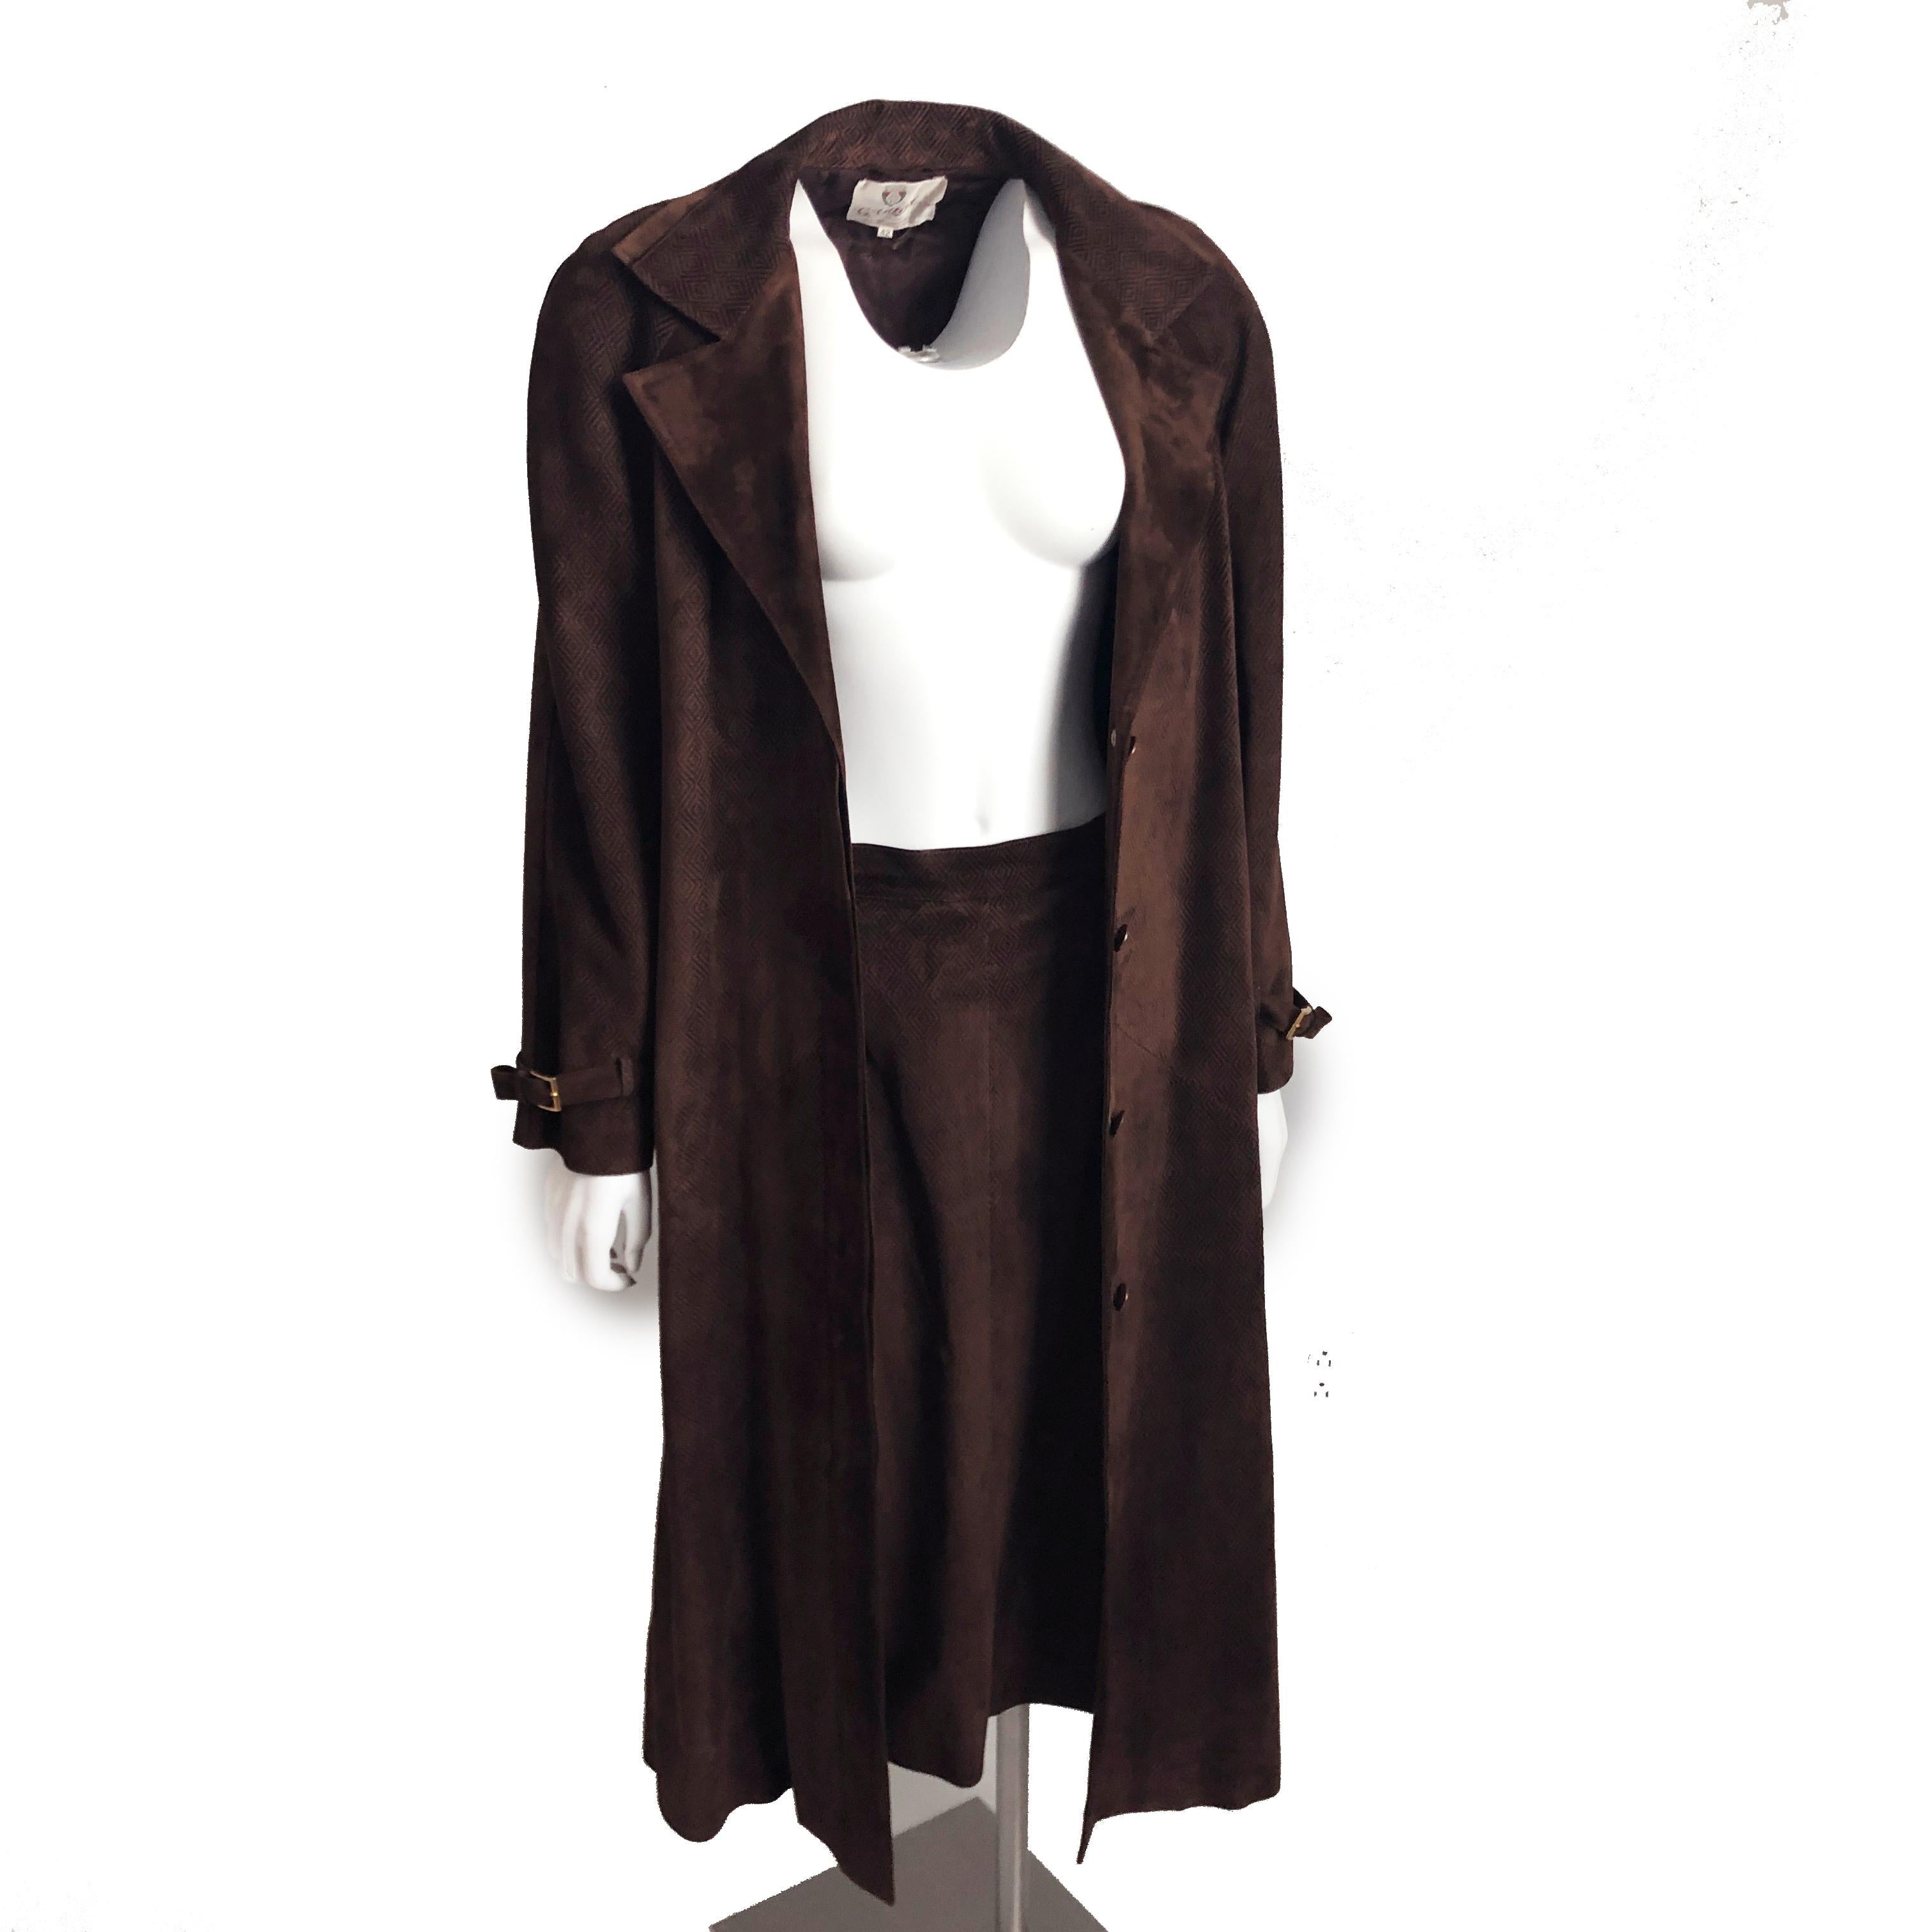 Gucci Long Textured Suede Coat with Matching Skirt 2pc Set Vintage Sz 42/46  For Sale 1